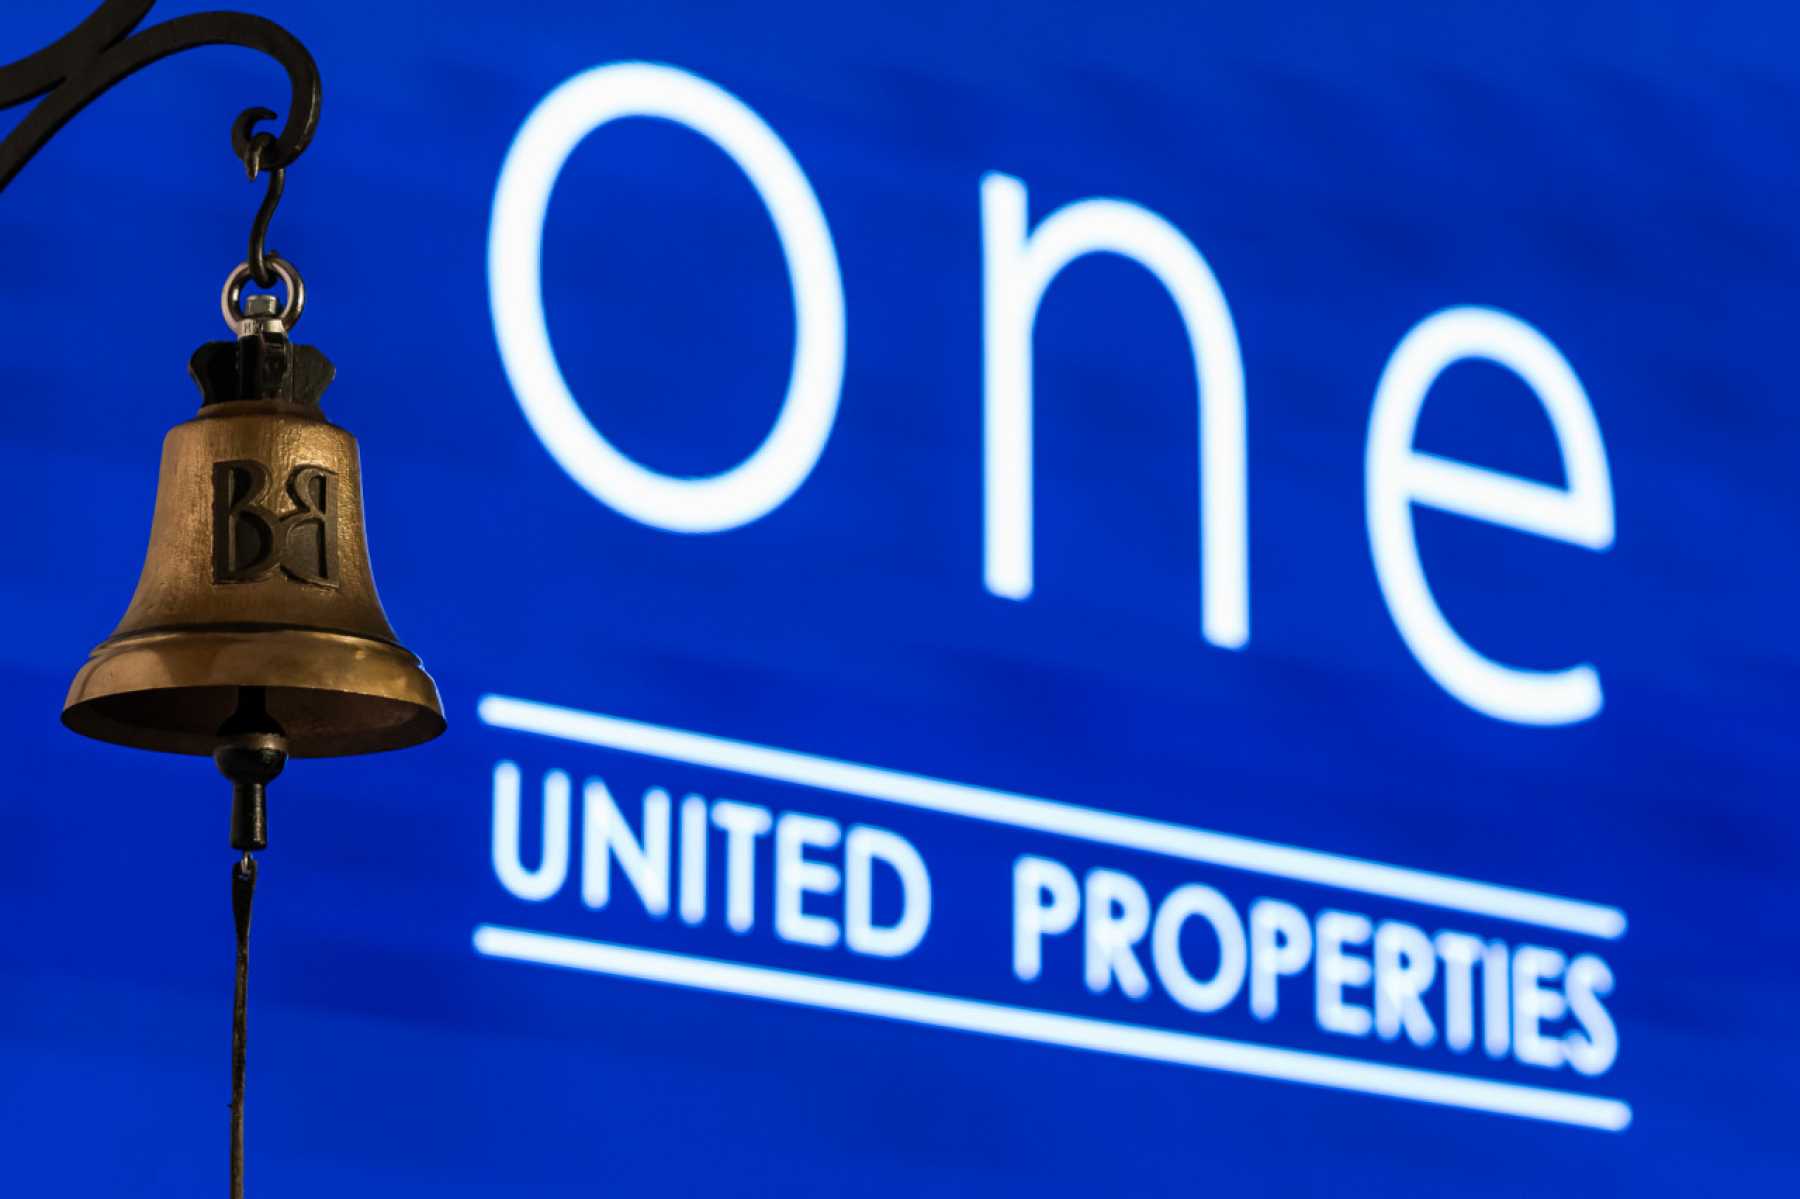 One United Properties expects more global institutional investors following the inclusion in the FTSE indices on December 20, 2021